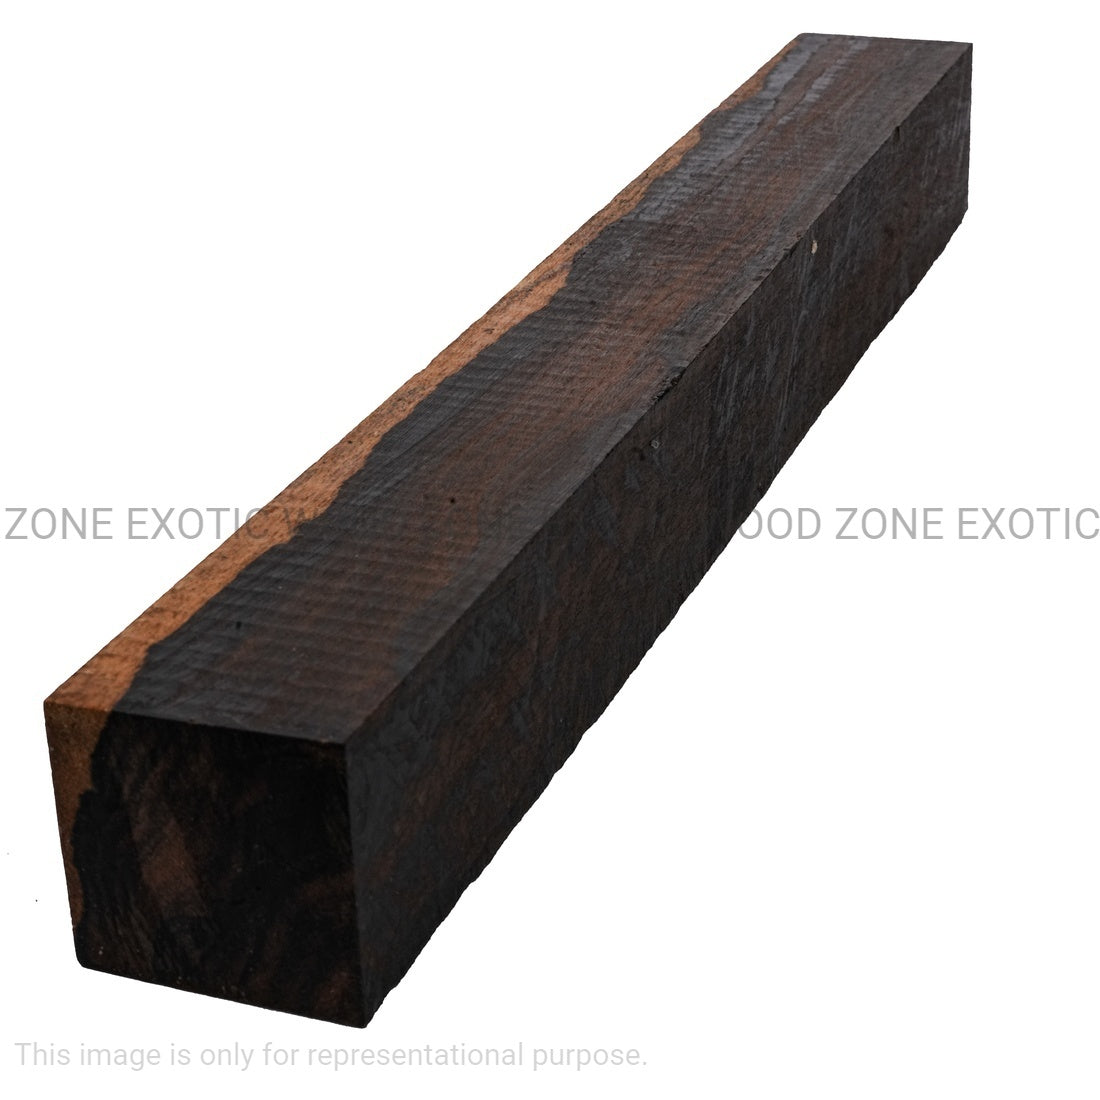 Pack Of 2 ,Gaboon Ebony Turning Wood Blanks 1-1/2&quot; x 1-1/2&quot; x 12&quot; - Exotic Wood Zone - Buy online Across USA 